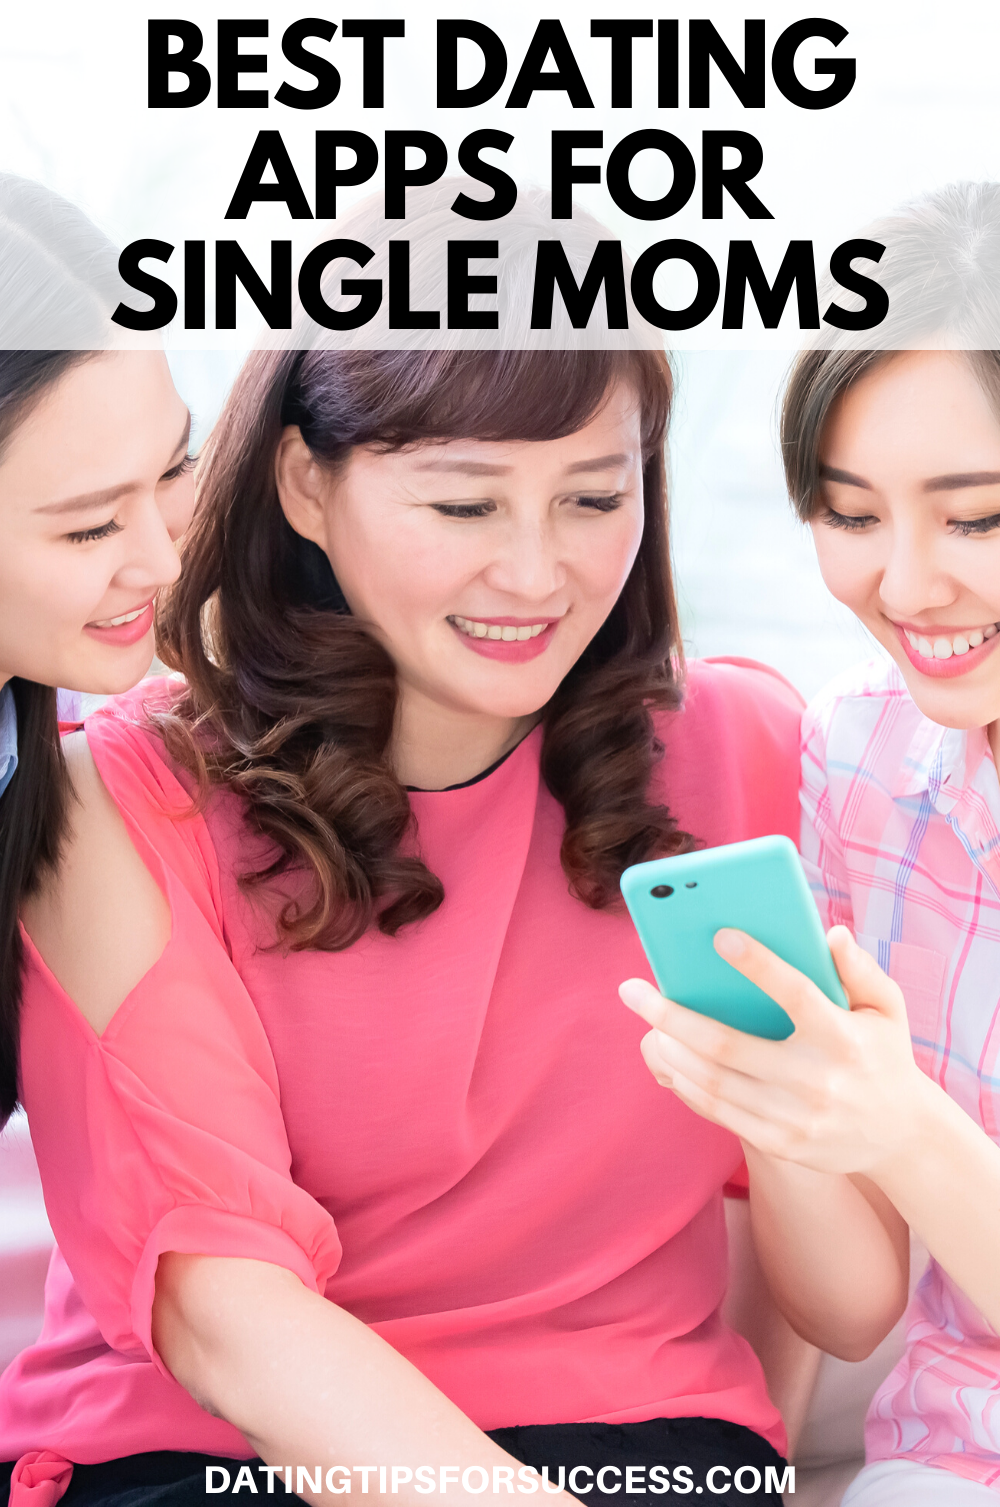 Why single moms stay single